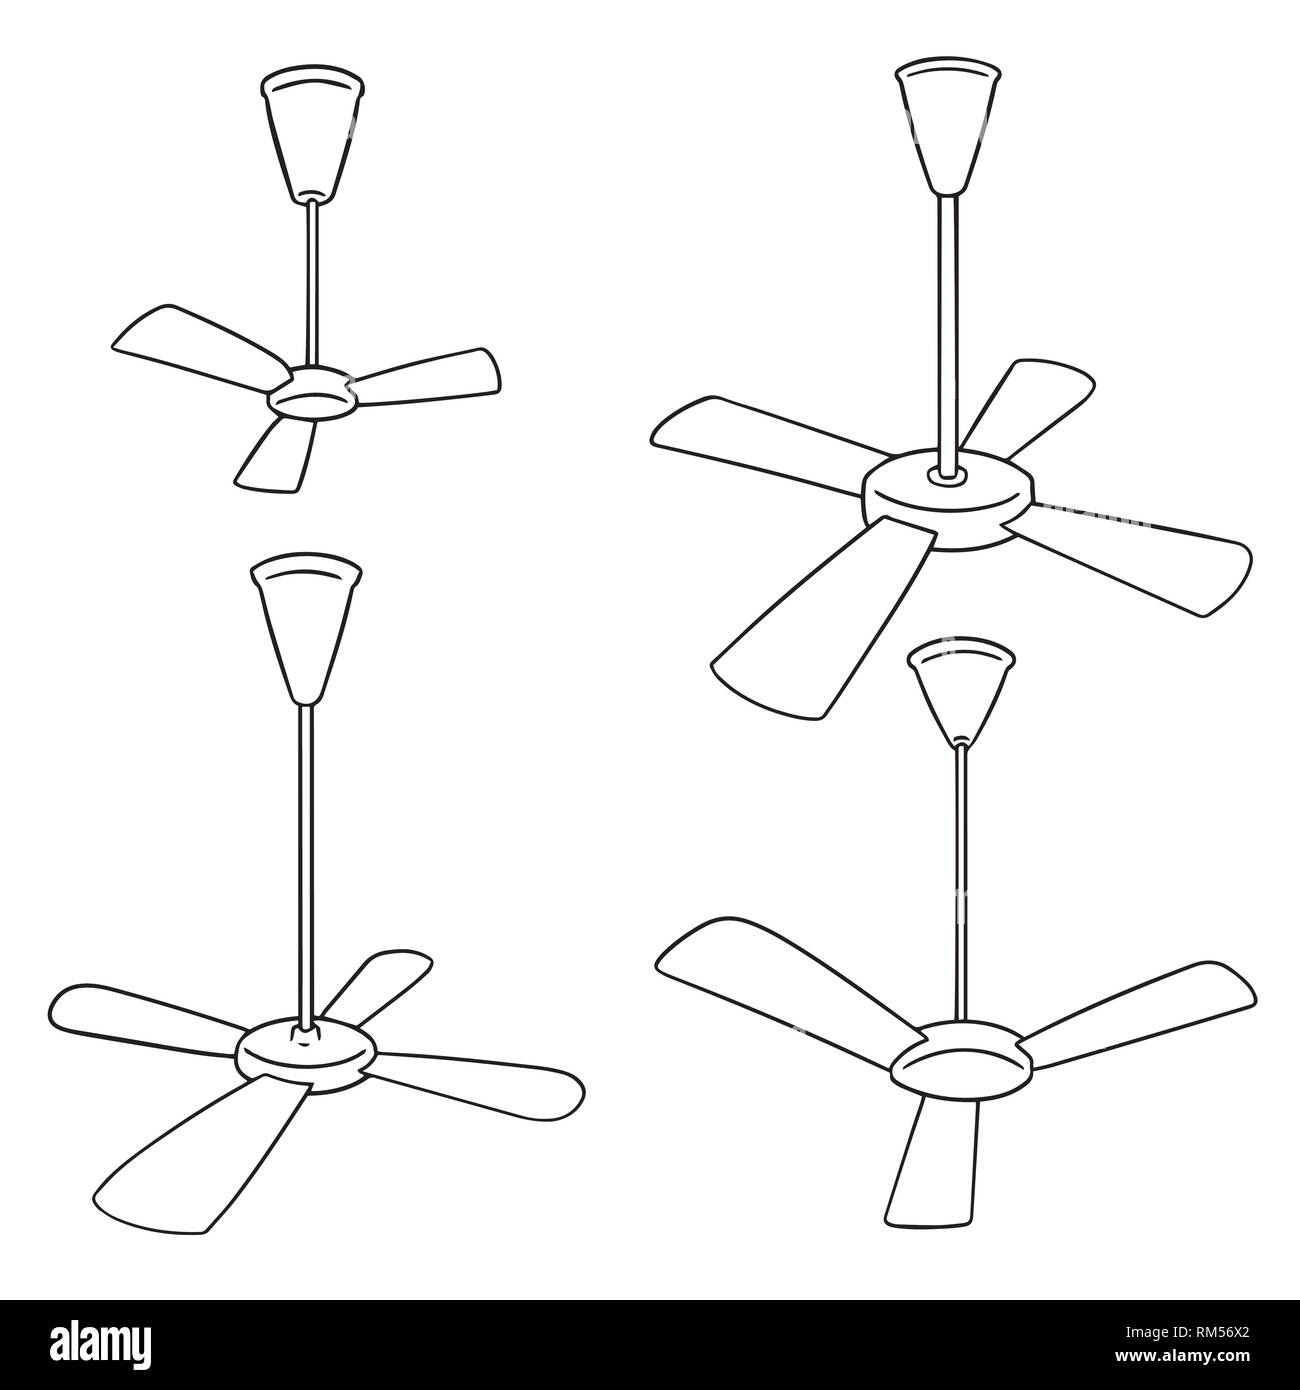 HOW TO DRAWING CEILING FAN - YouTube